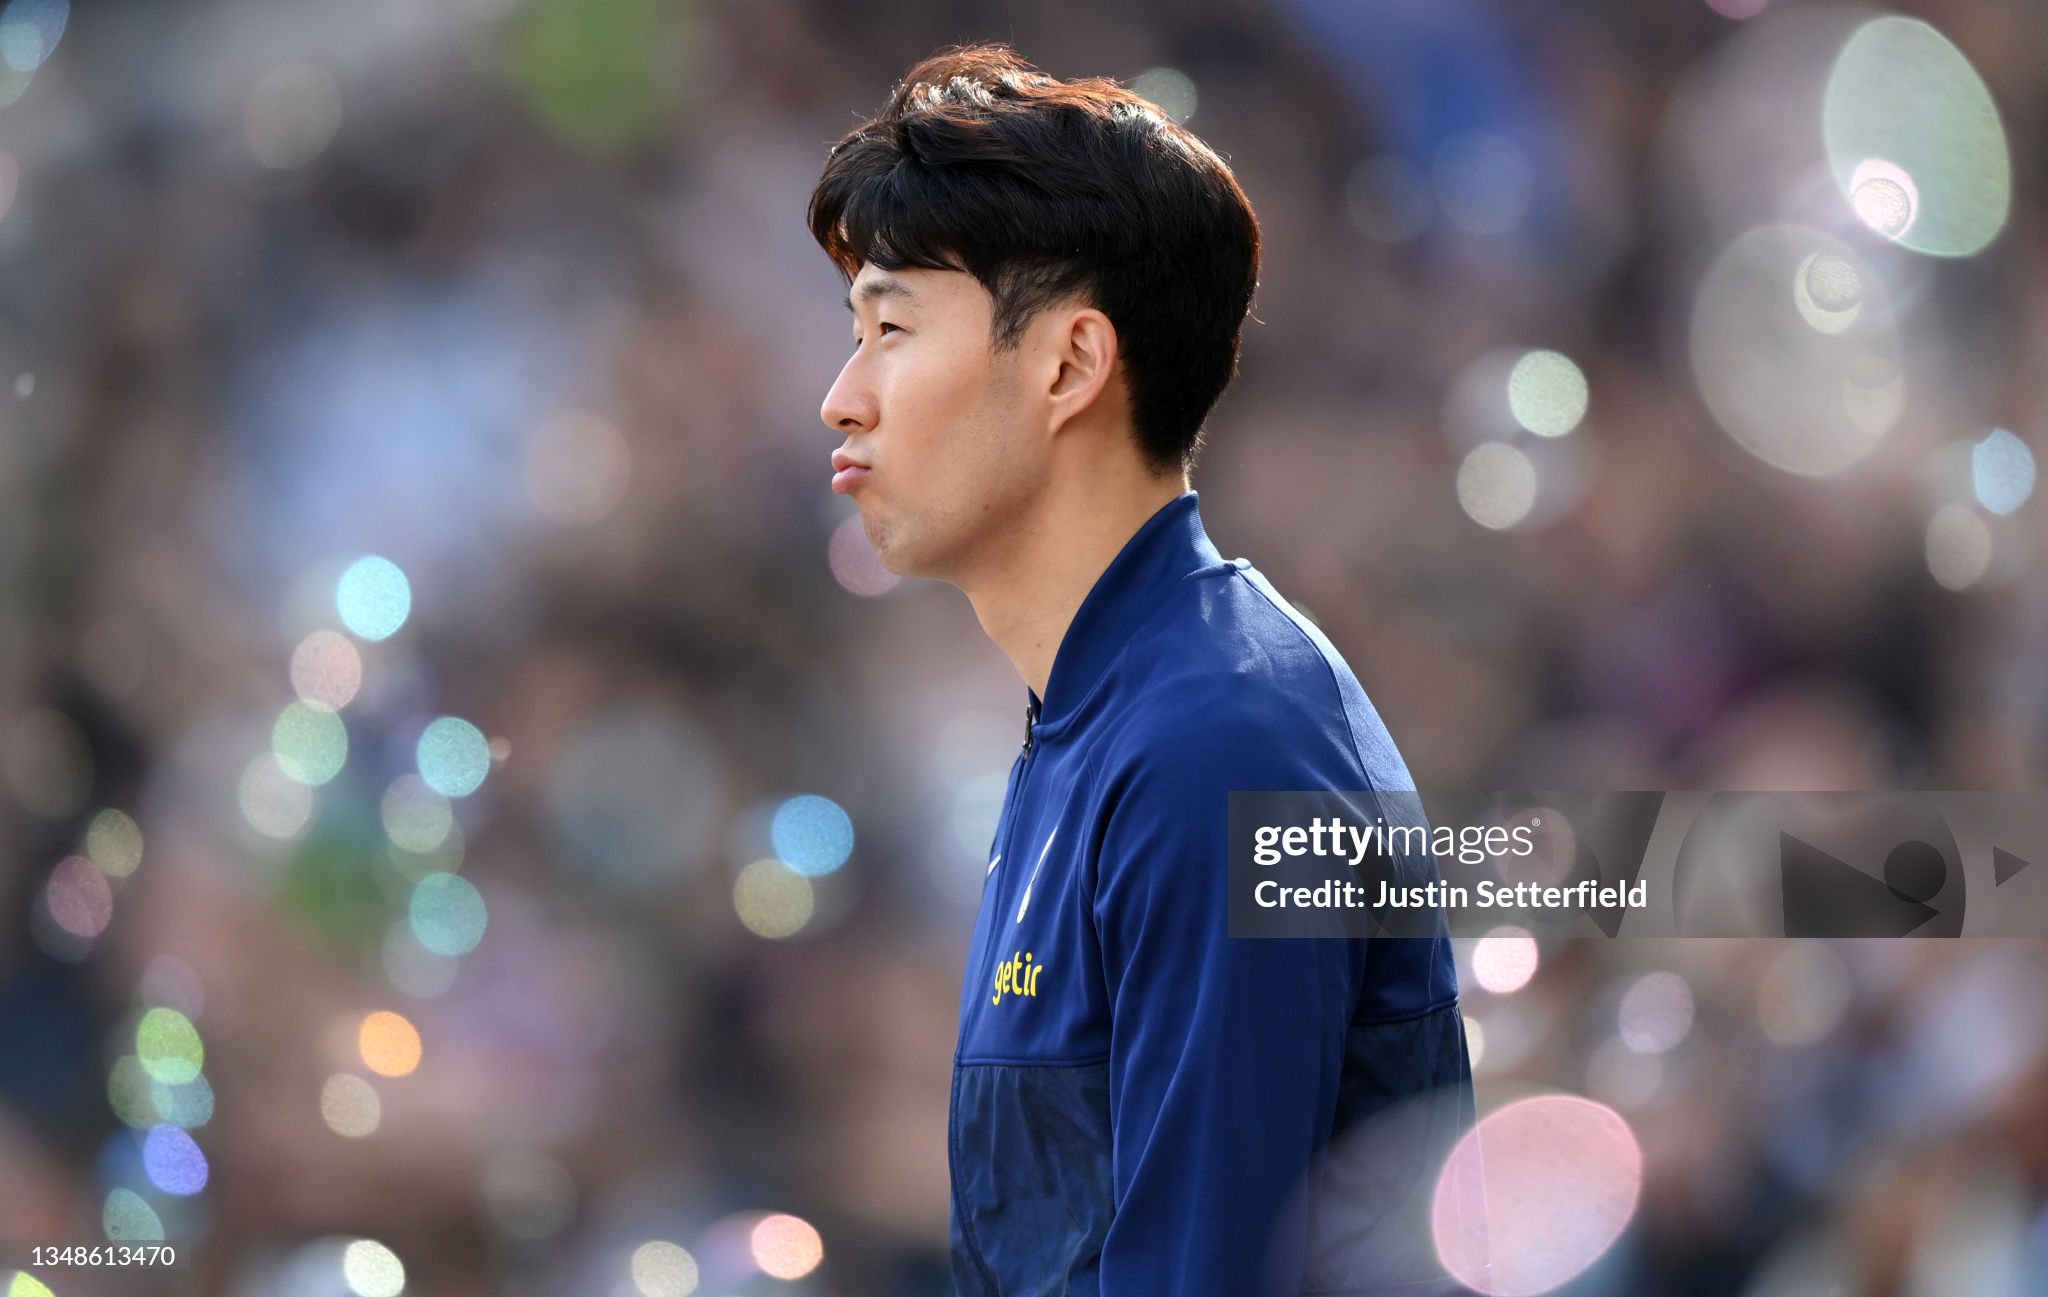 gettyimages-1348613470-2048x2048.jpg